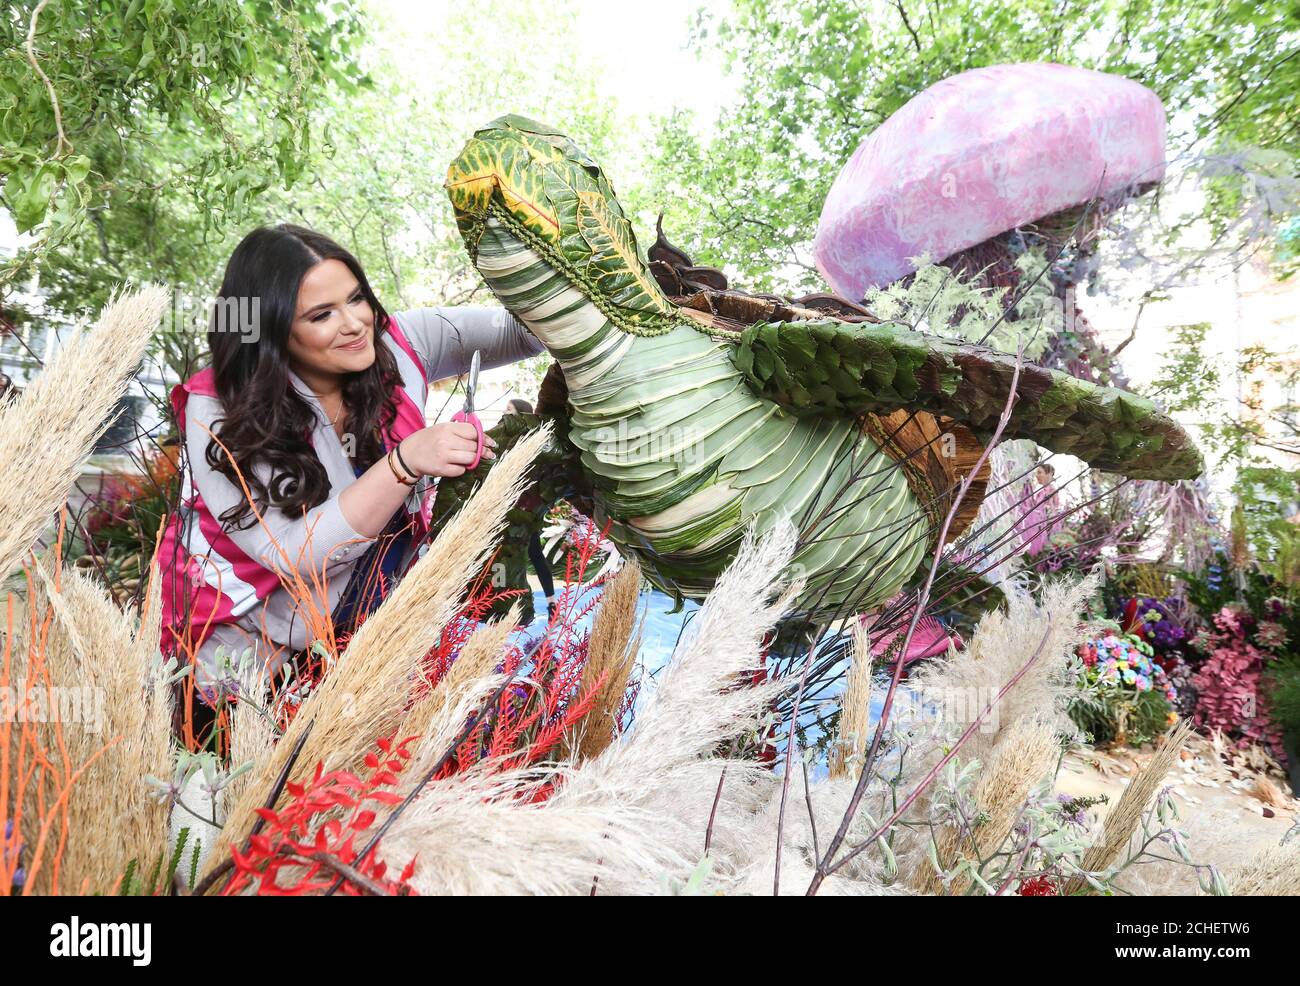 Ruth Davis (All For Love London) puts finishing touches to a Sea Turtle at the Coral Reef Display on Sloane Square at this year’s Chelsea in Bloom, London’s largest free flower festival in London. Stock Photo